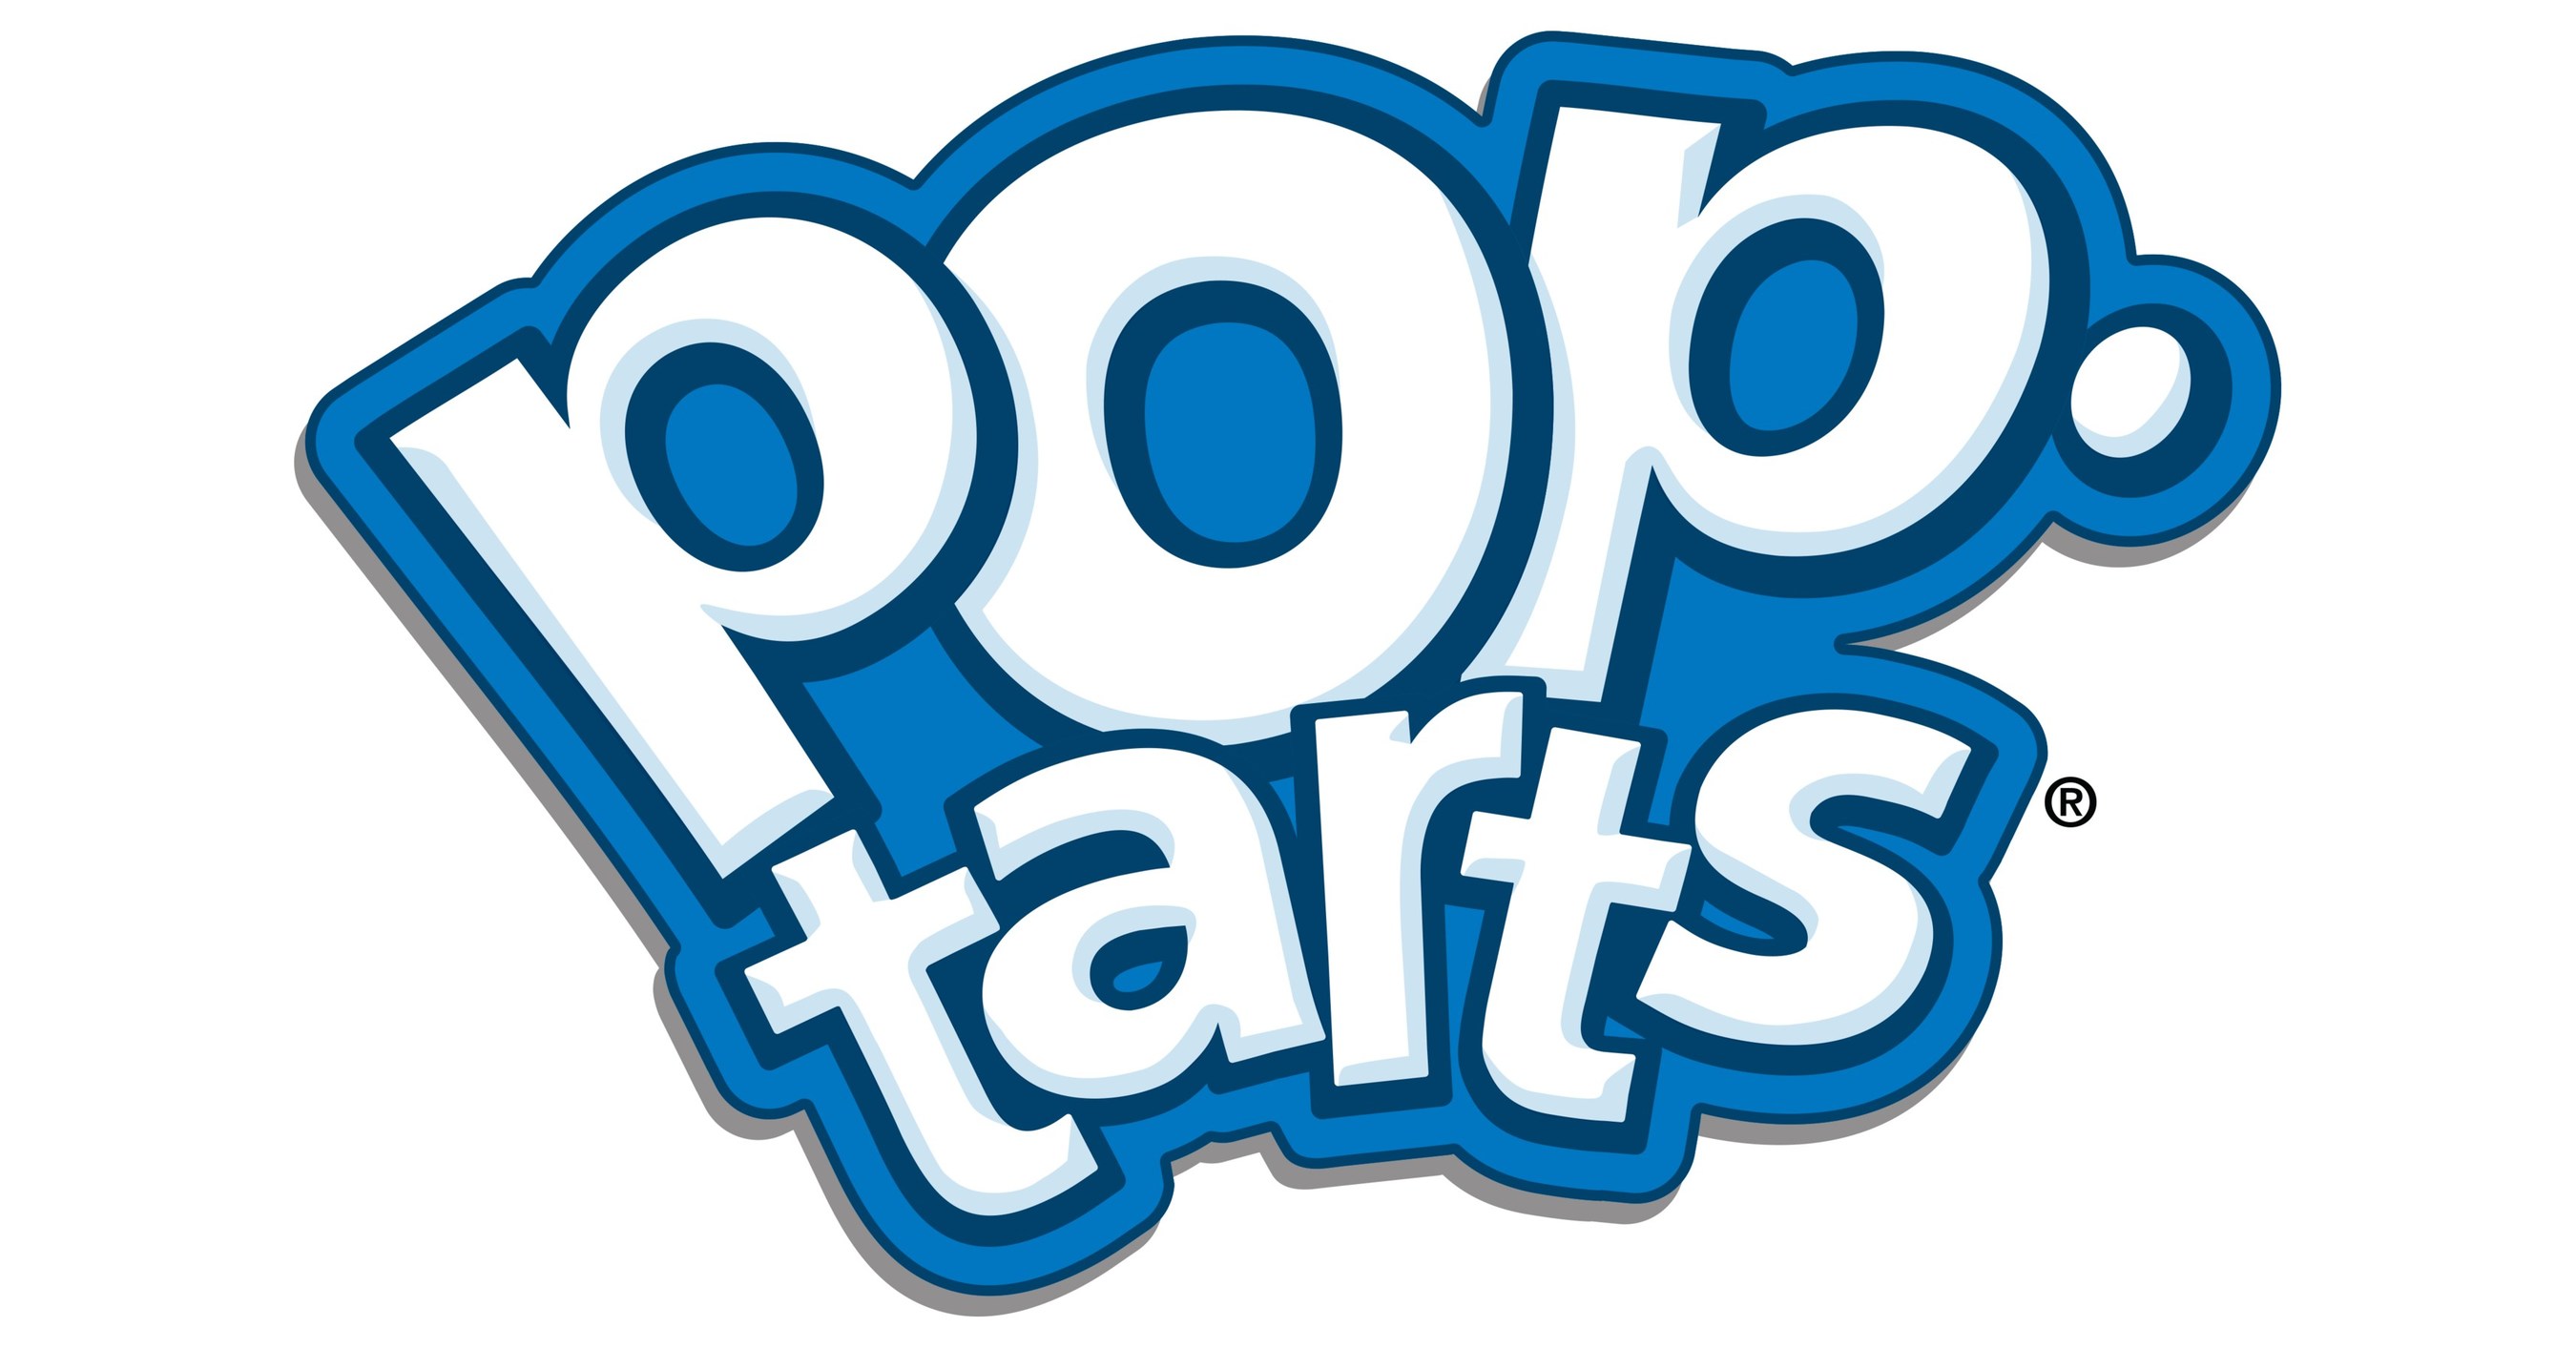 NEW POPTARTS FROSTED CHOCOLATEY CHIP PANCAKE MAKES ALLDAYBREAKFAST A